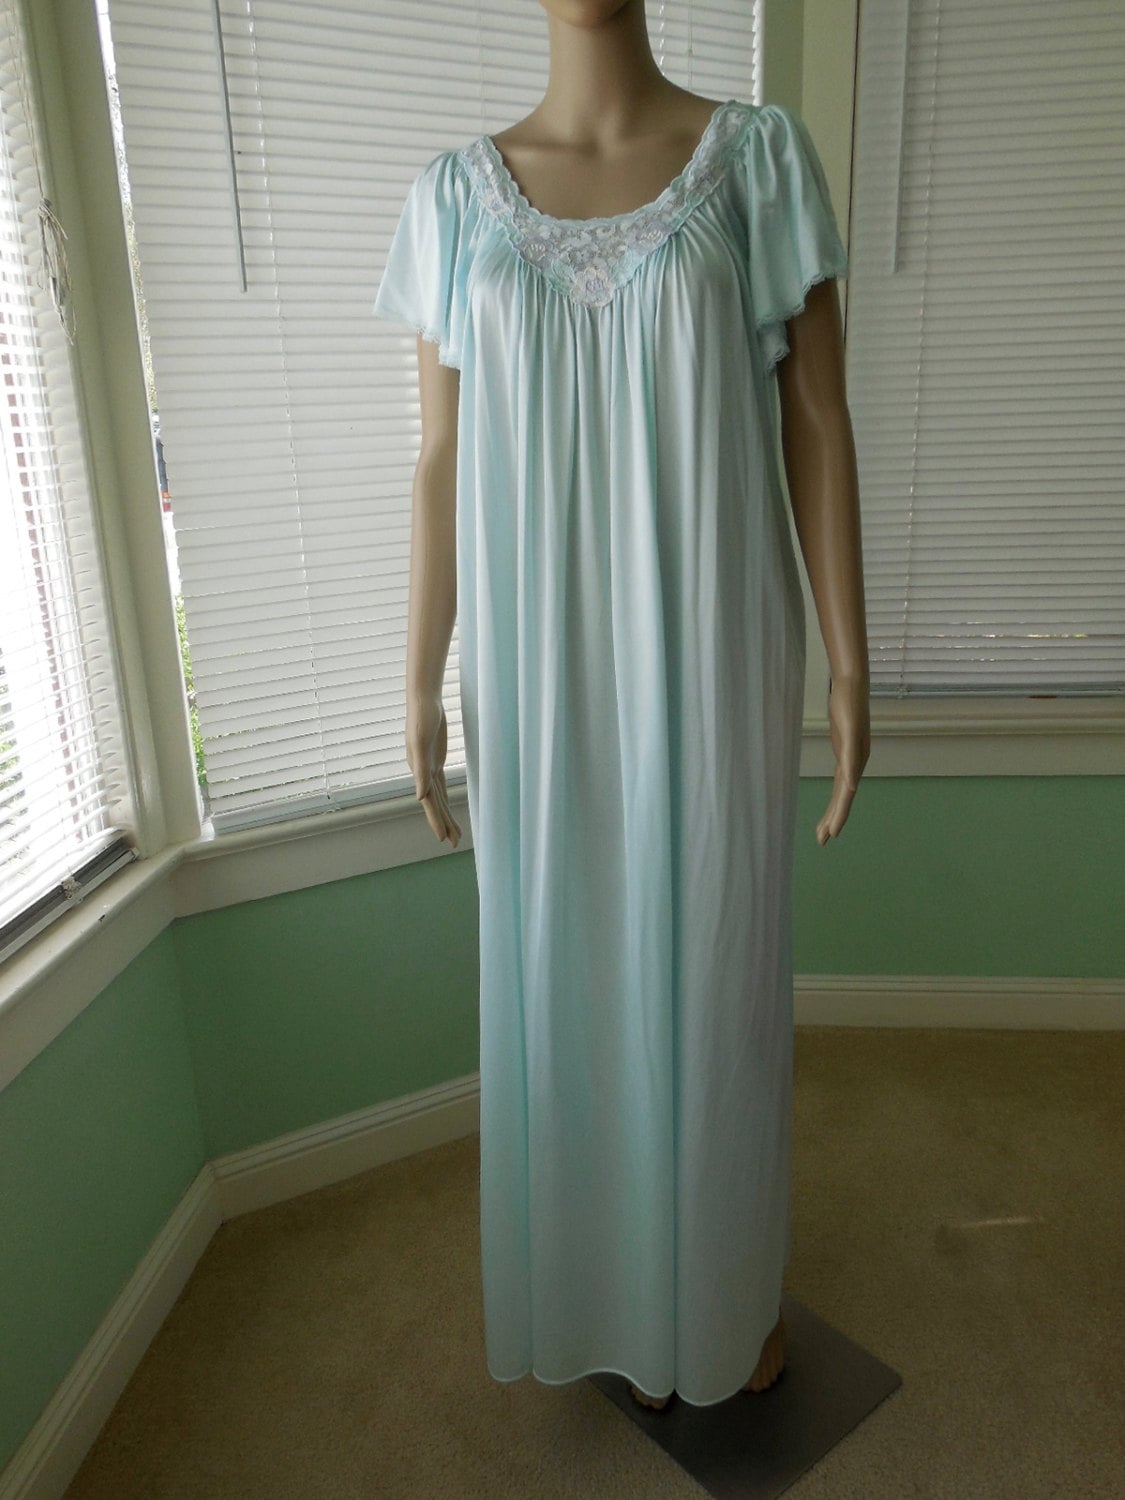 Womens Nightgown Vanity Fair Long Nightgown Negligee Full